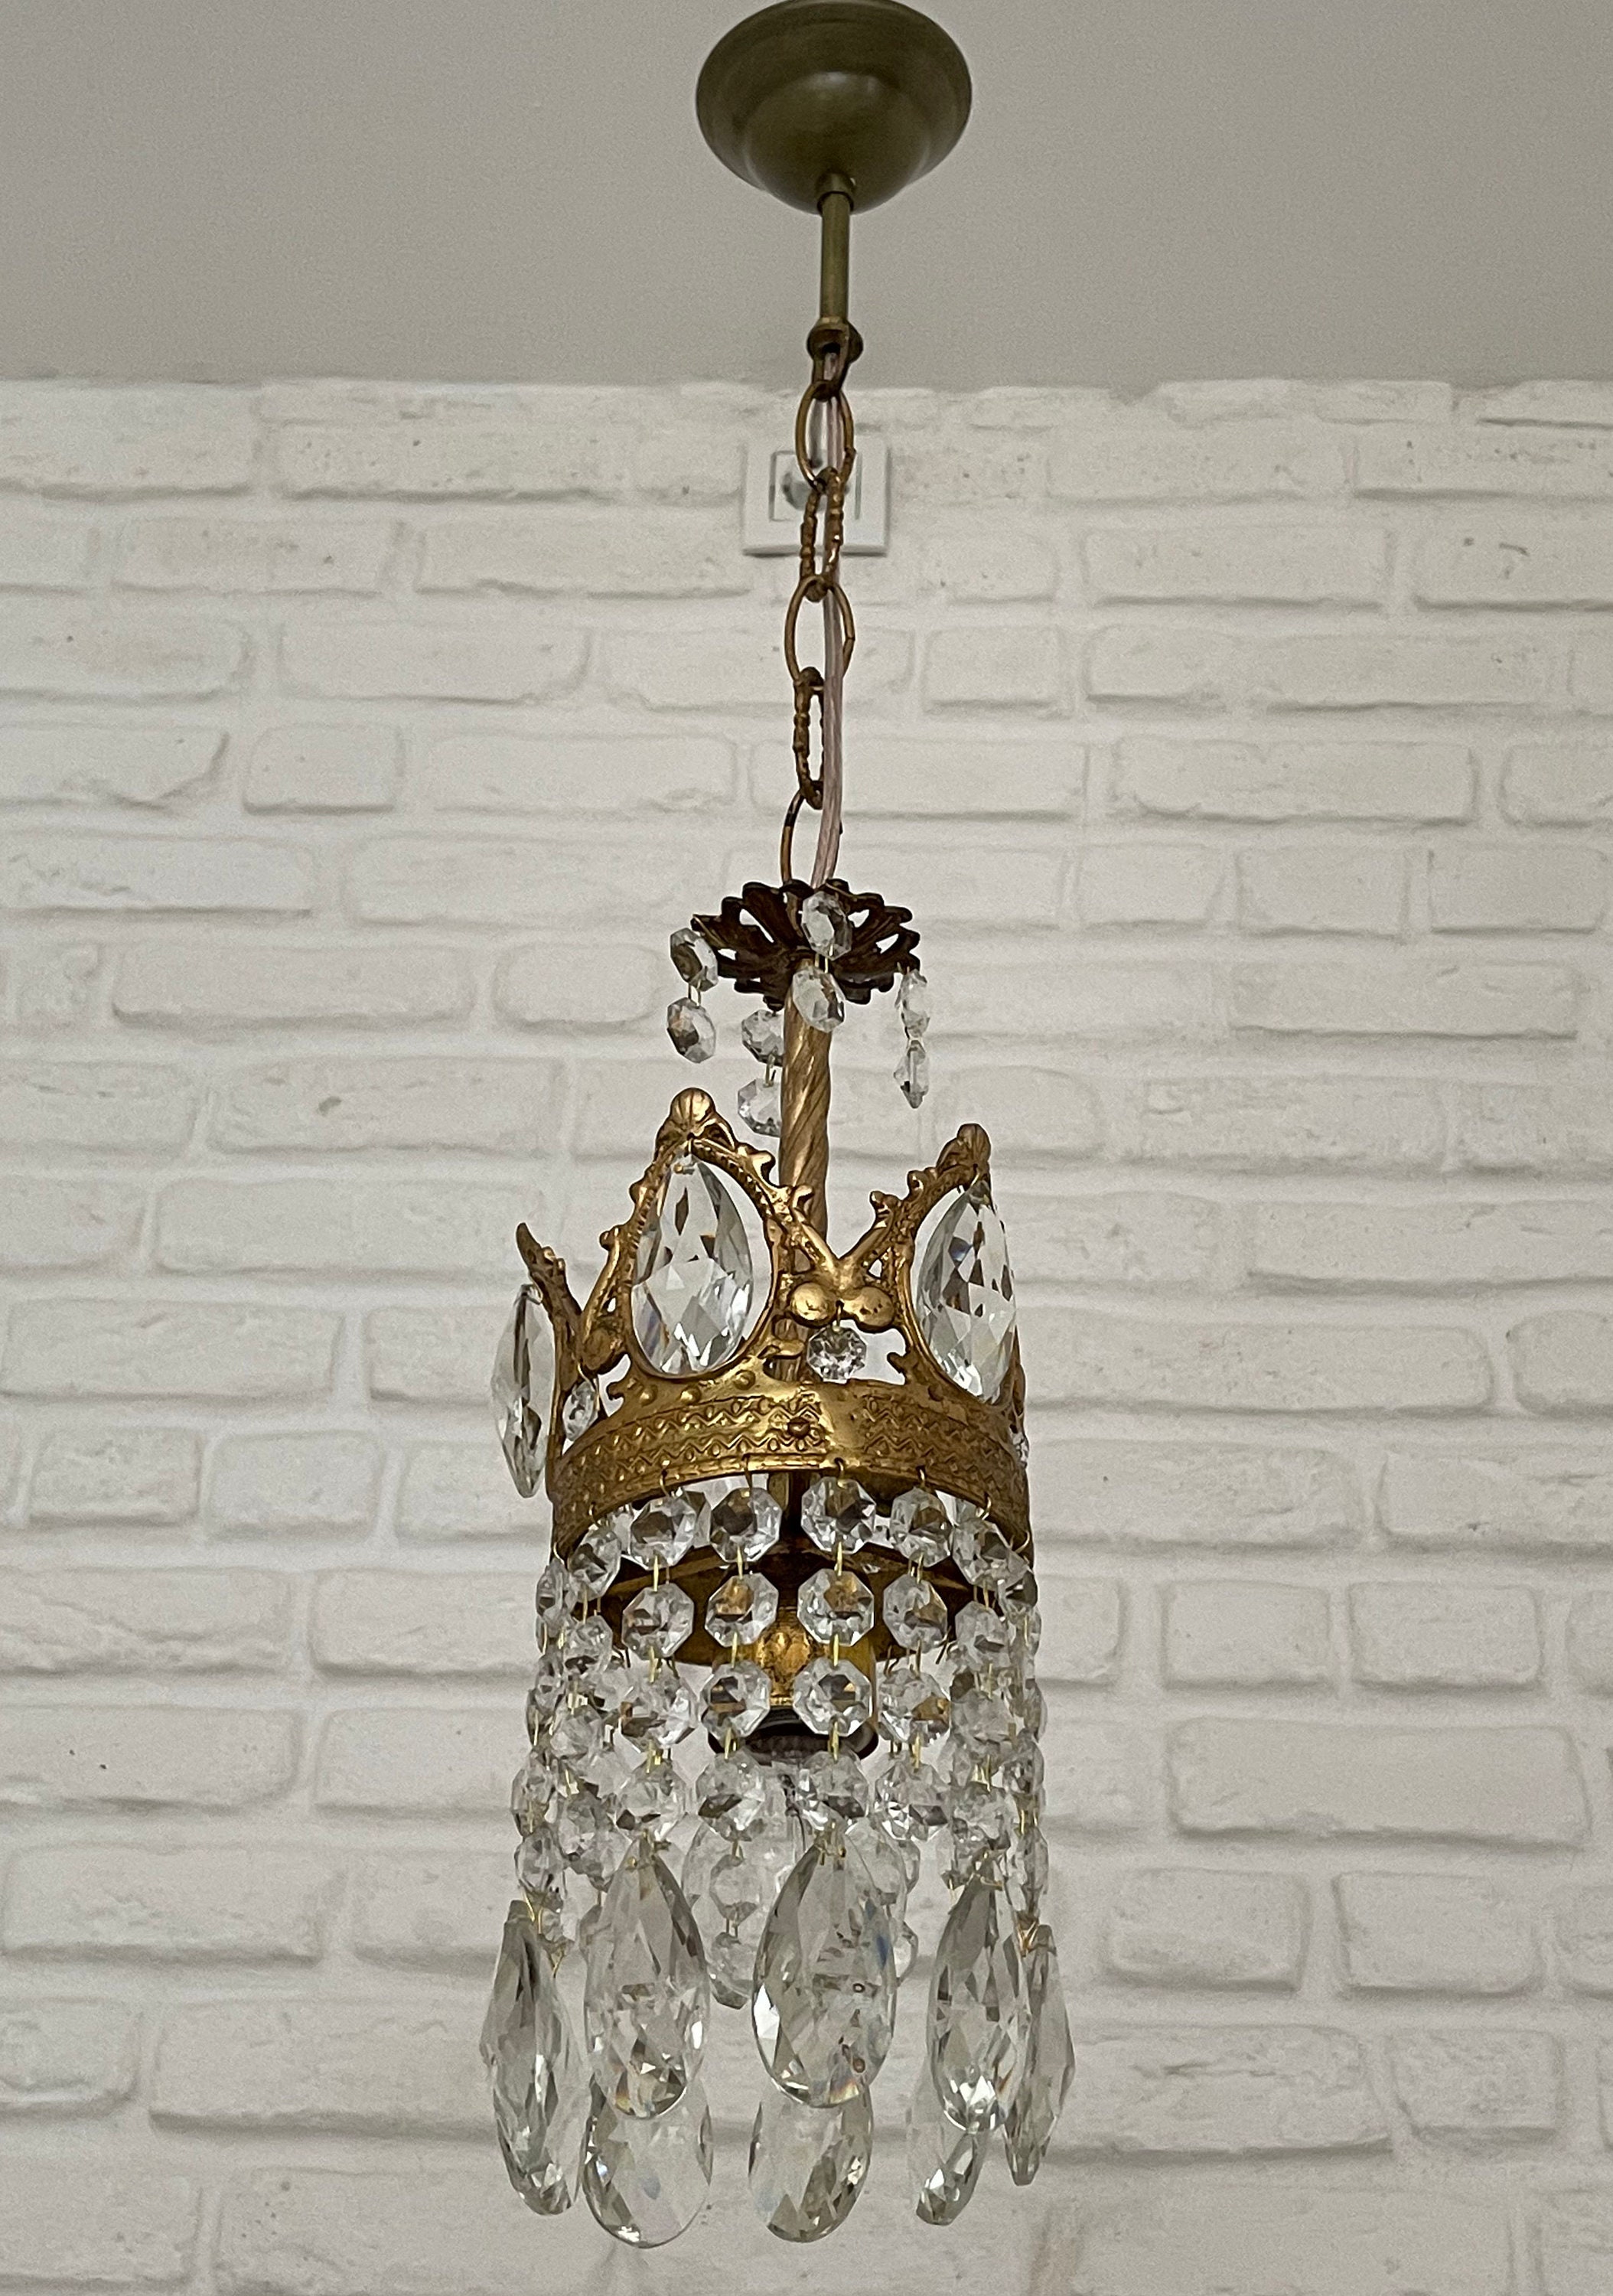 Antique Vintage Brass & Crystals Small Chandelier Ceiling Light